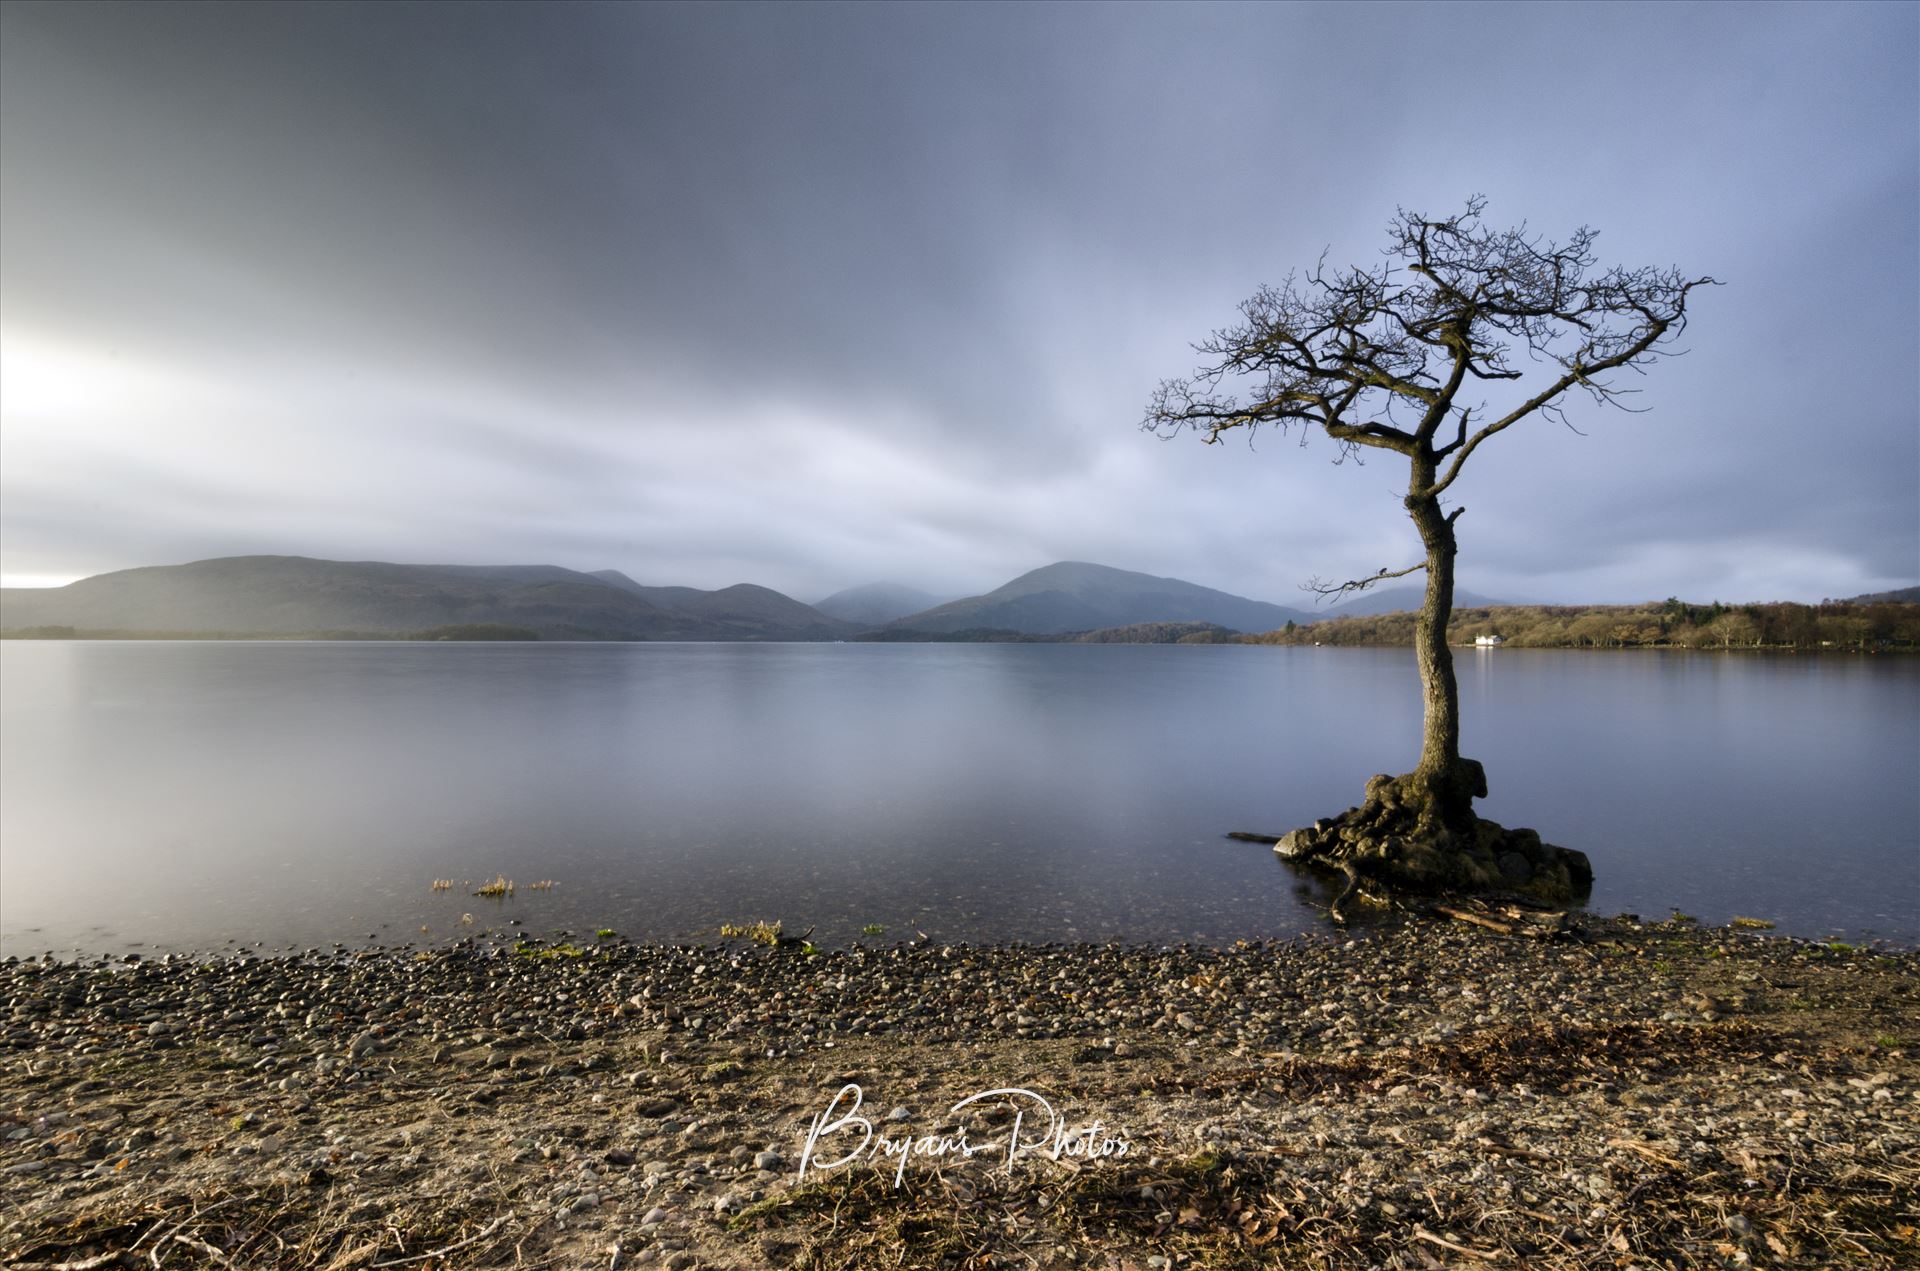 Milarrochy Bay A colour photograph of Loch Lomond taken from Milarrochy Bay on the eastern shore of the loch near Balmaha. by Bryans Photos